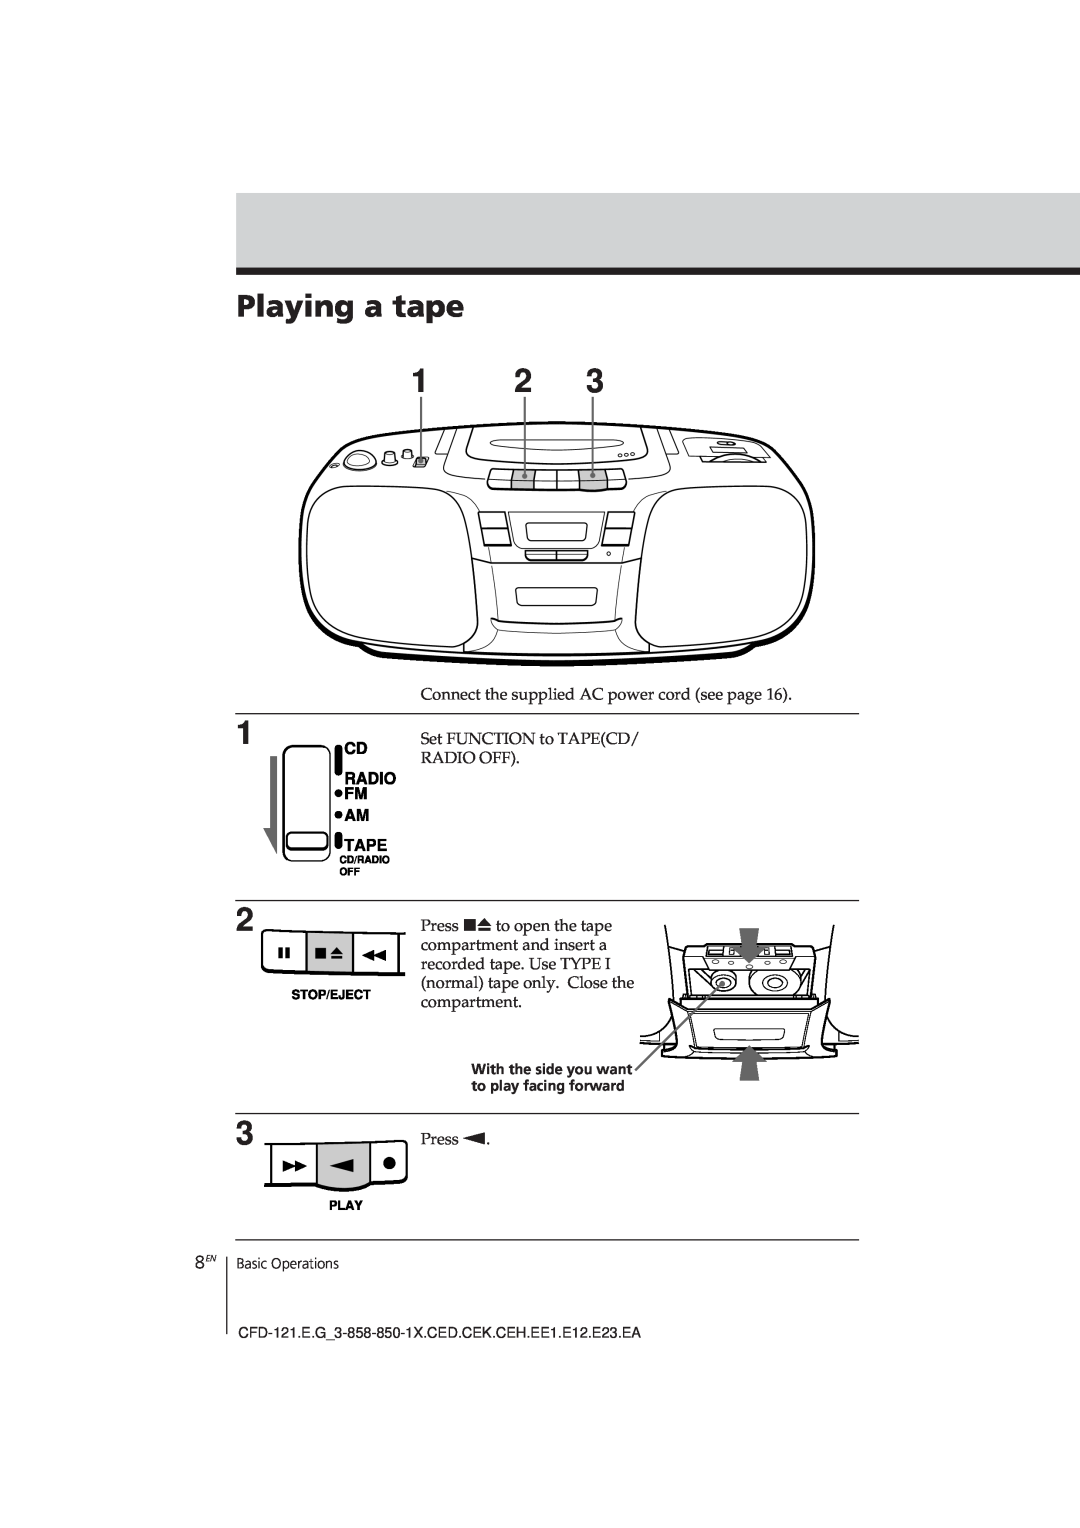 Sony CFD-121 Playing a tape, Connect the supplied AC power cord see page, Set FUNCTION to TAPECD, Radio Off, compartment 